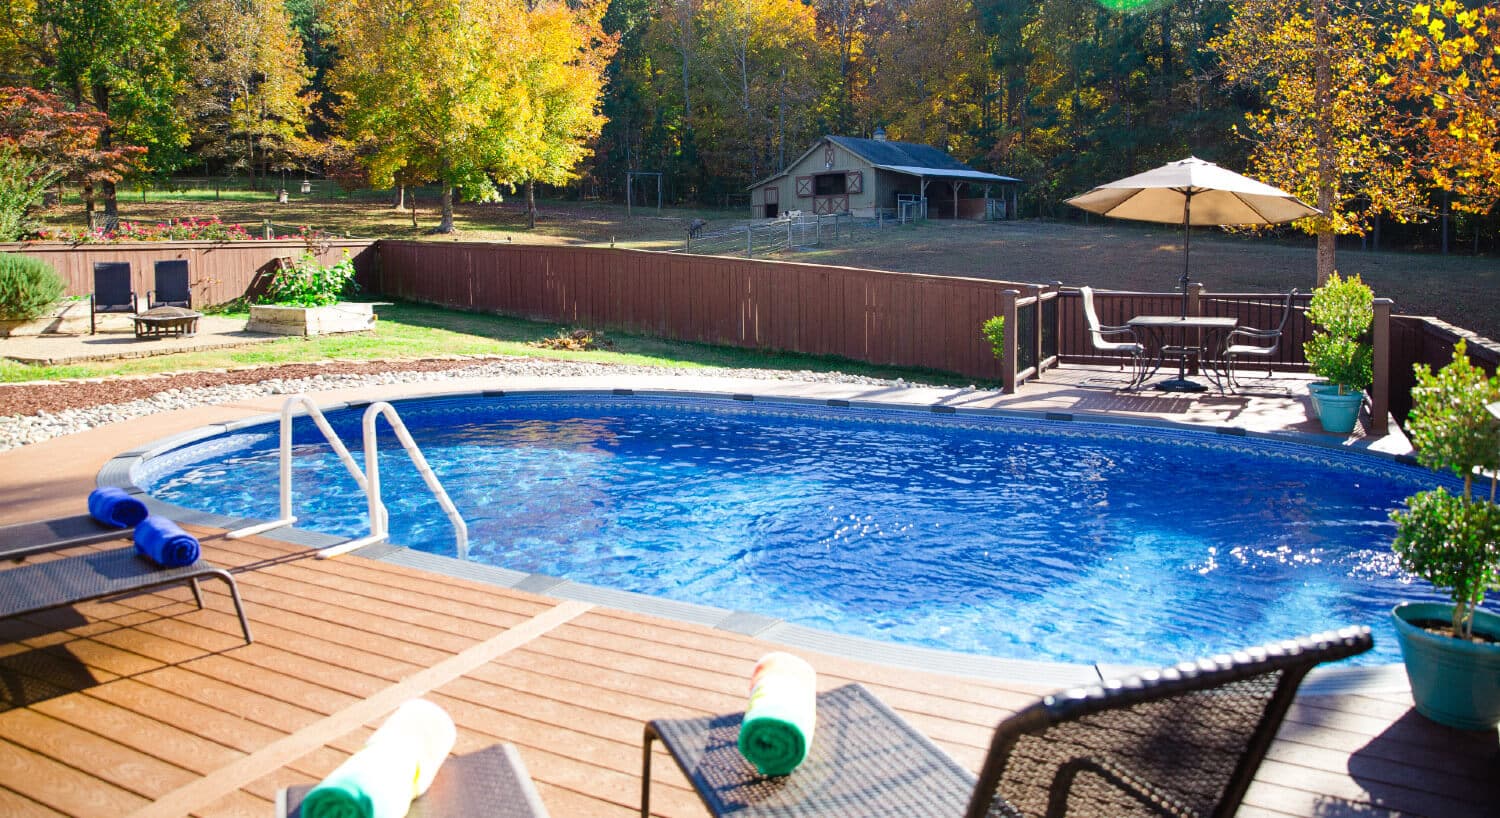 In-ground pool surrounded by wood deck with lawn chairs facing cream barn with green roof and trees all around